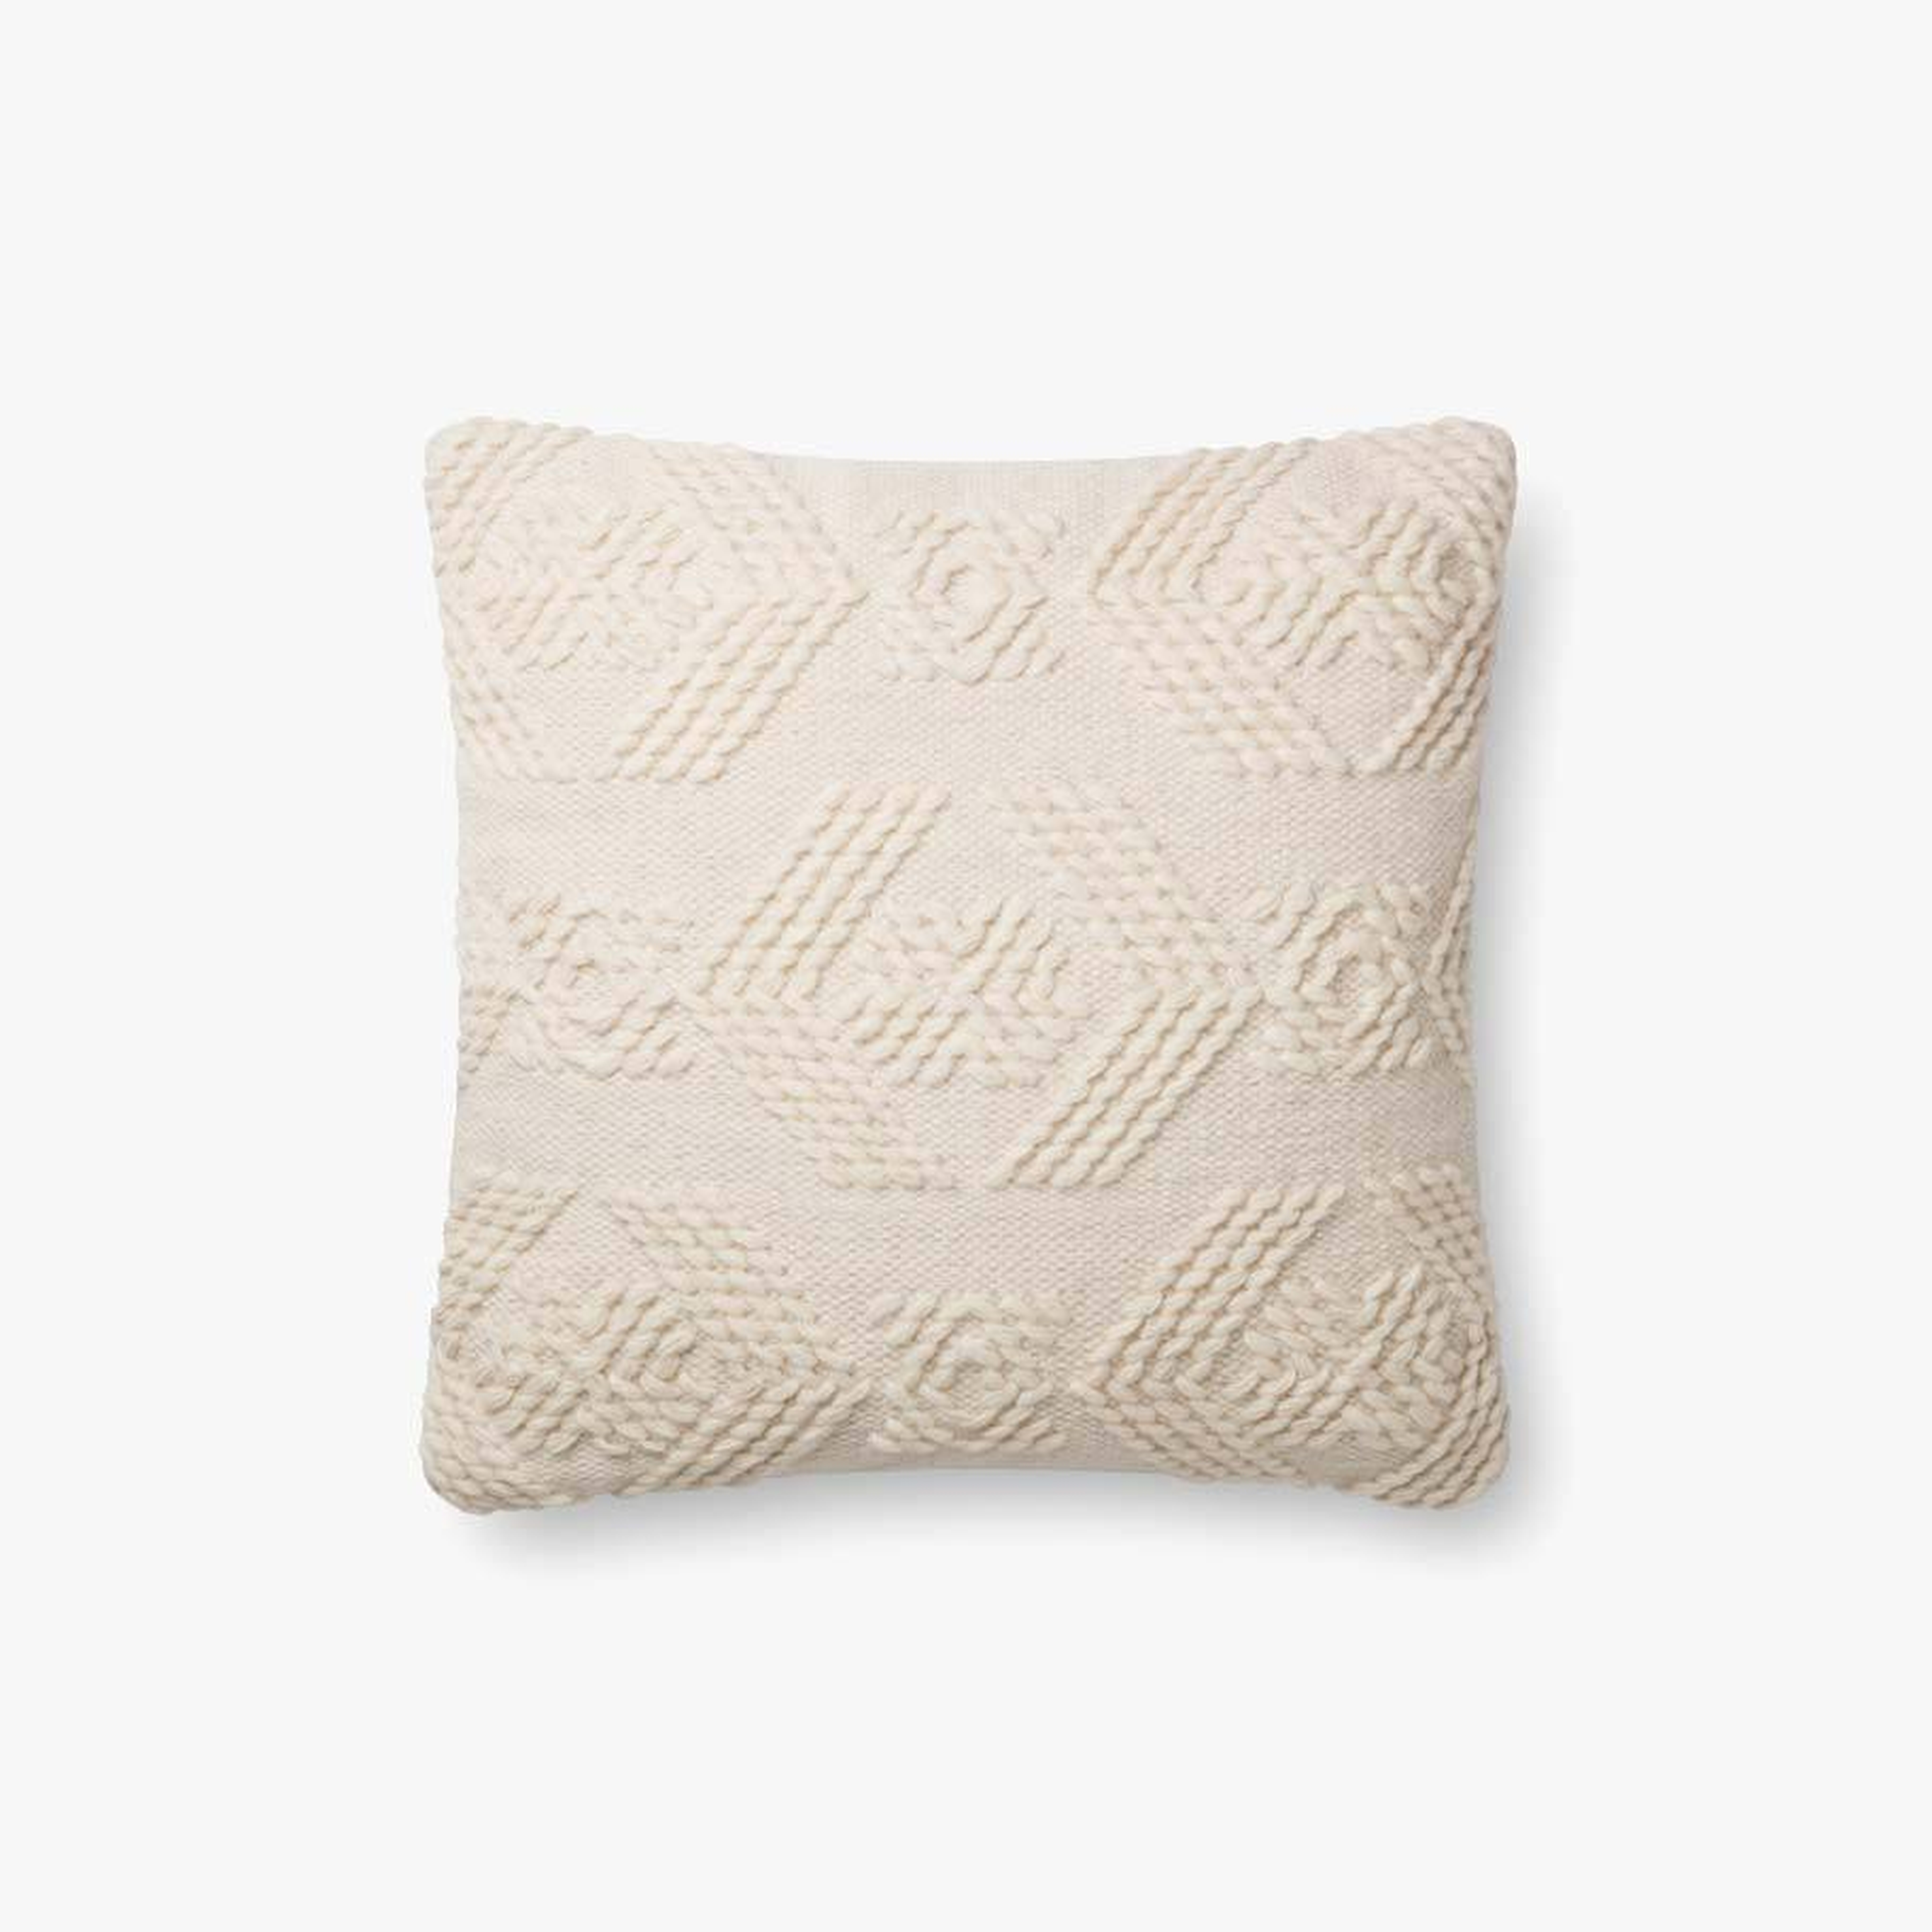 Embroidered Pillow Cover, Ivory, 18" x 18" - Loma Threads